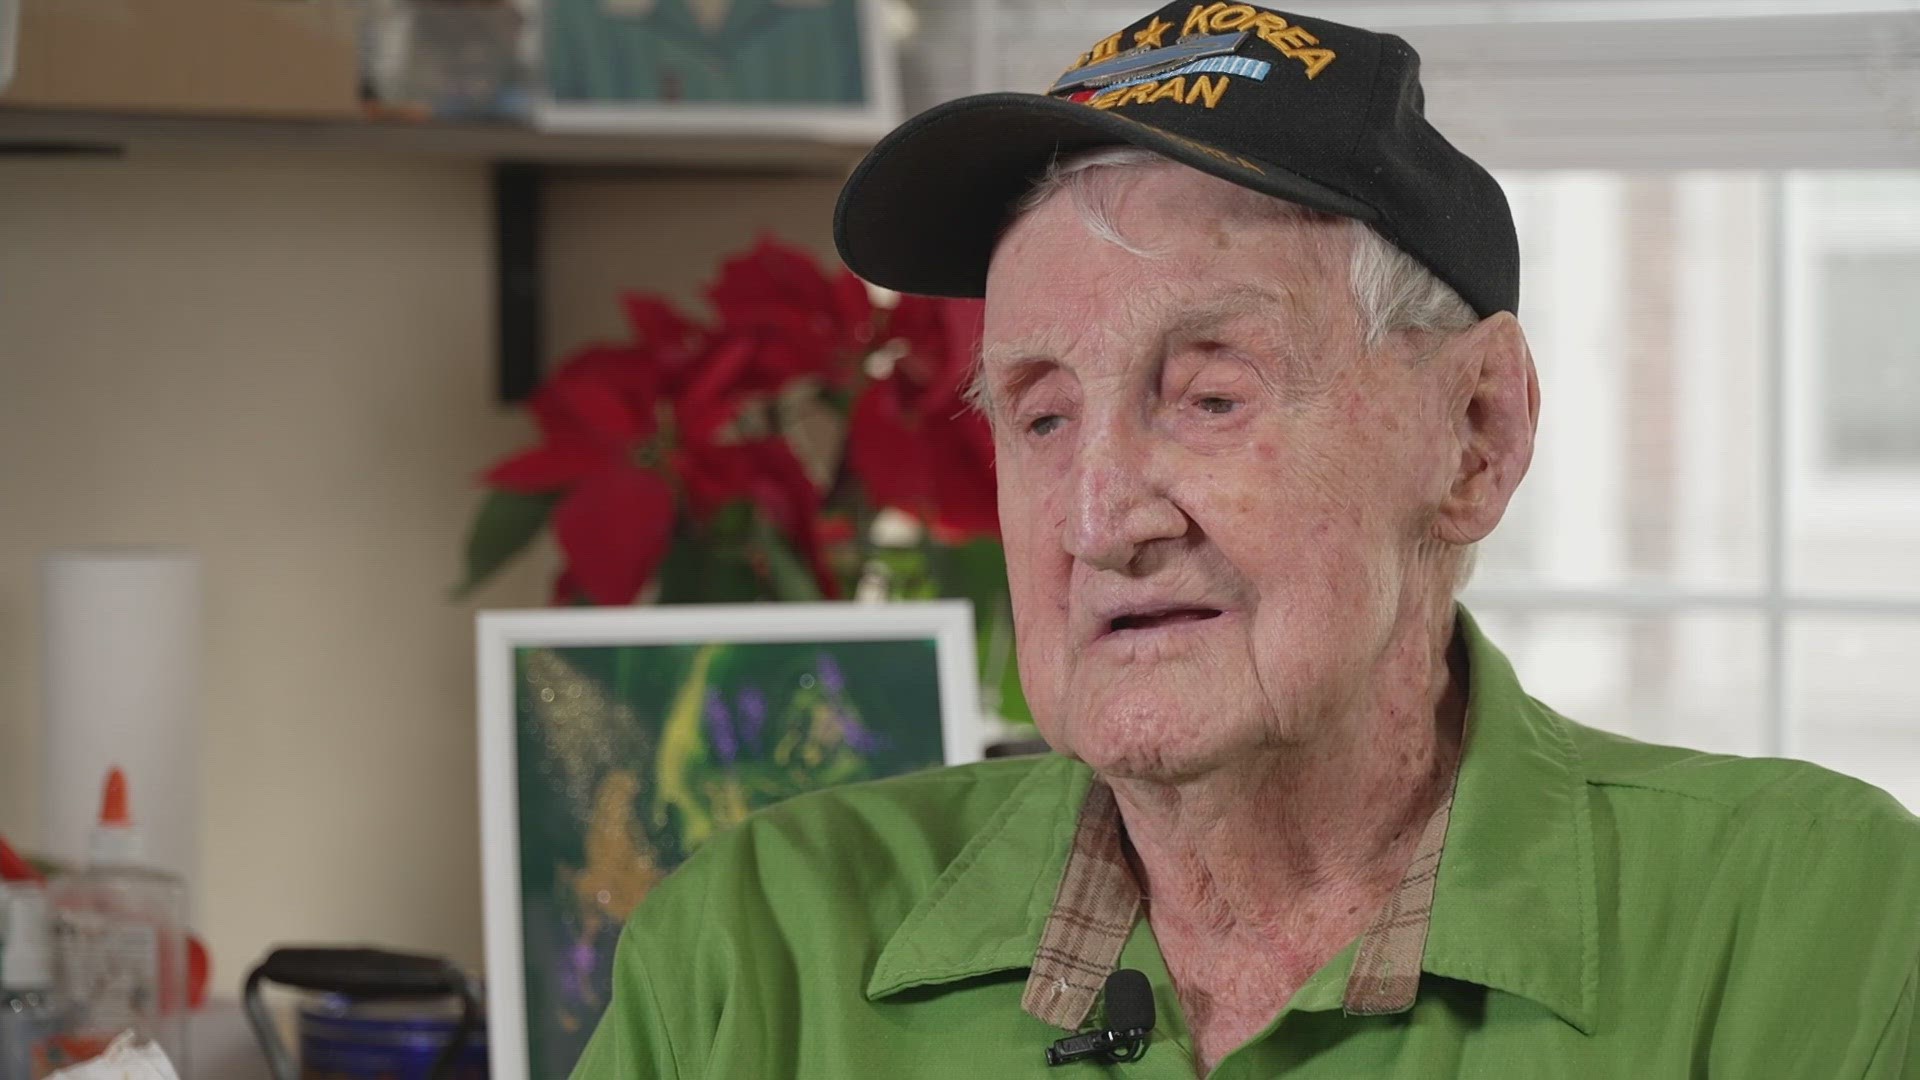 "Picasso Pete" is using his artistic talents to help support fellow veterans.